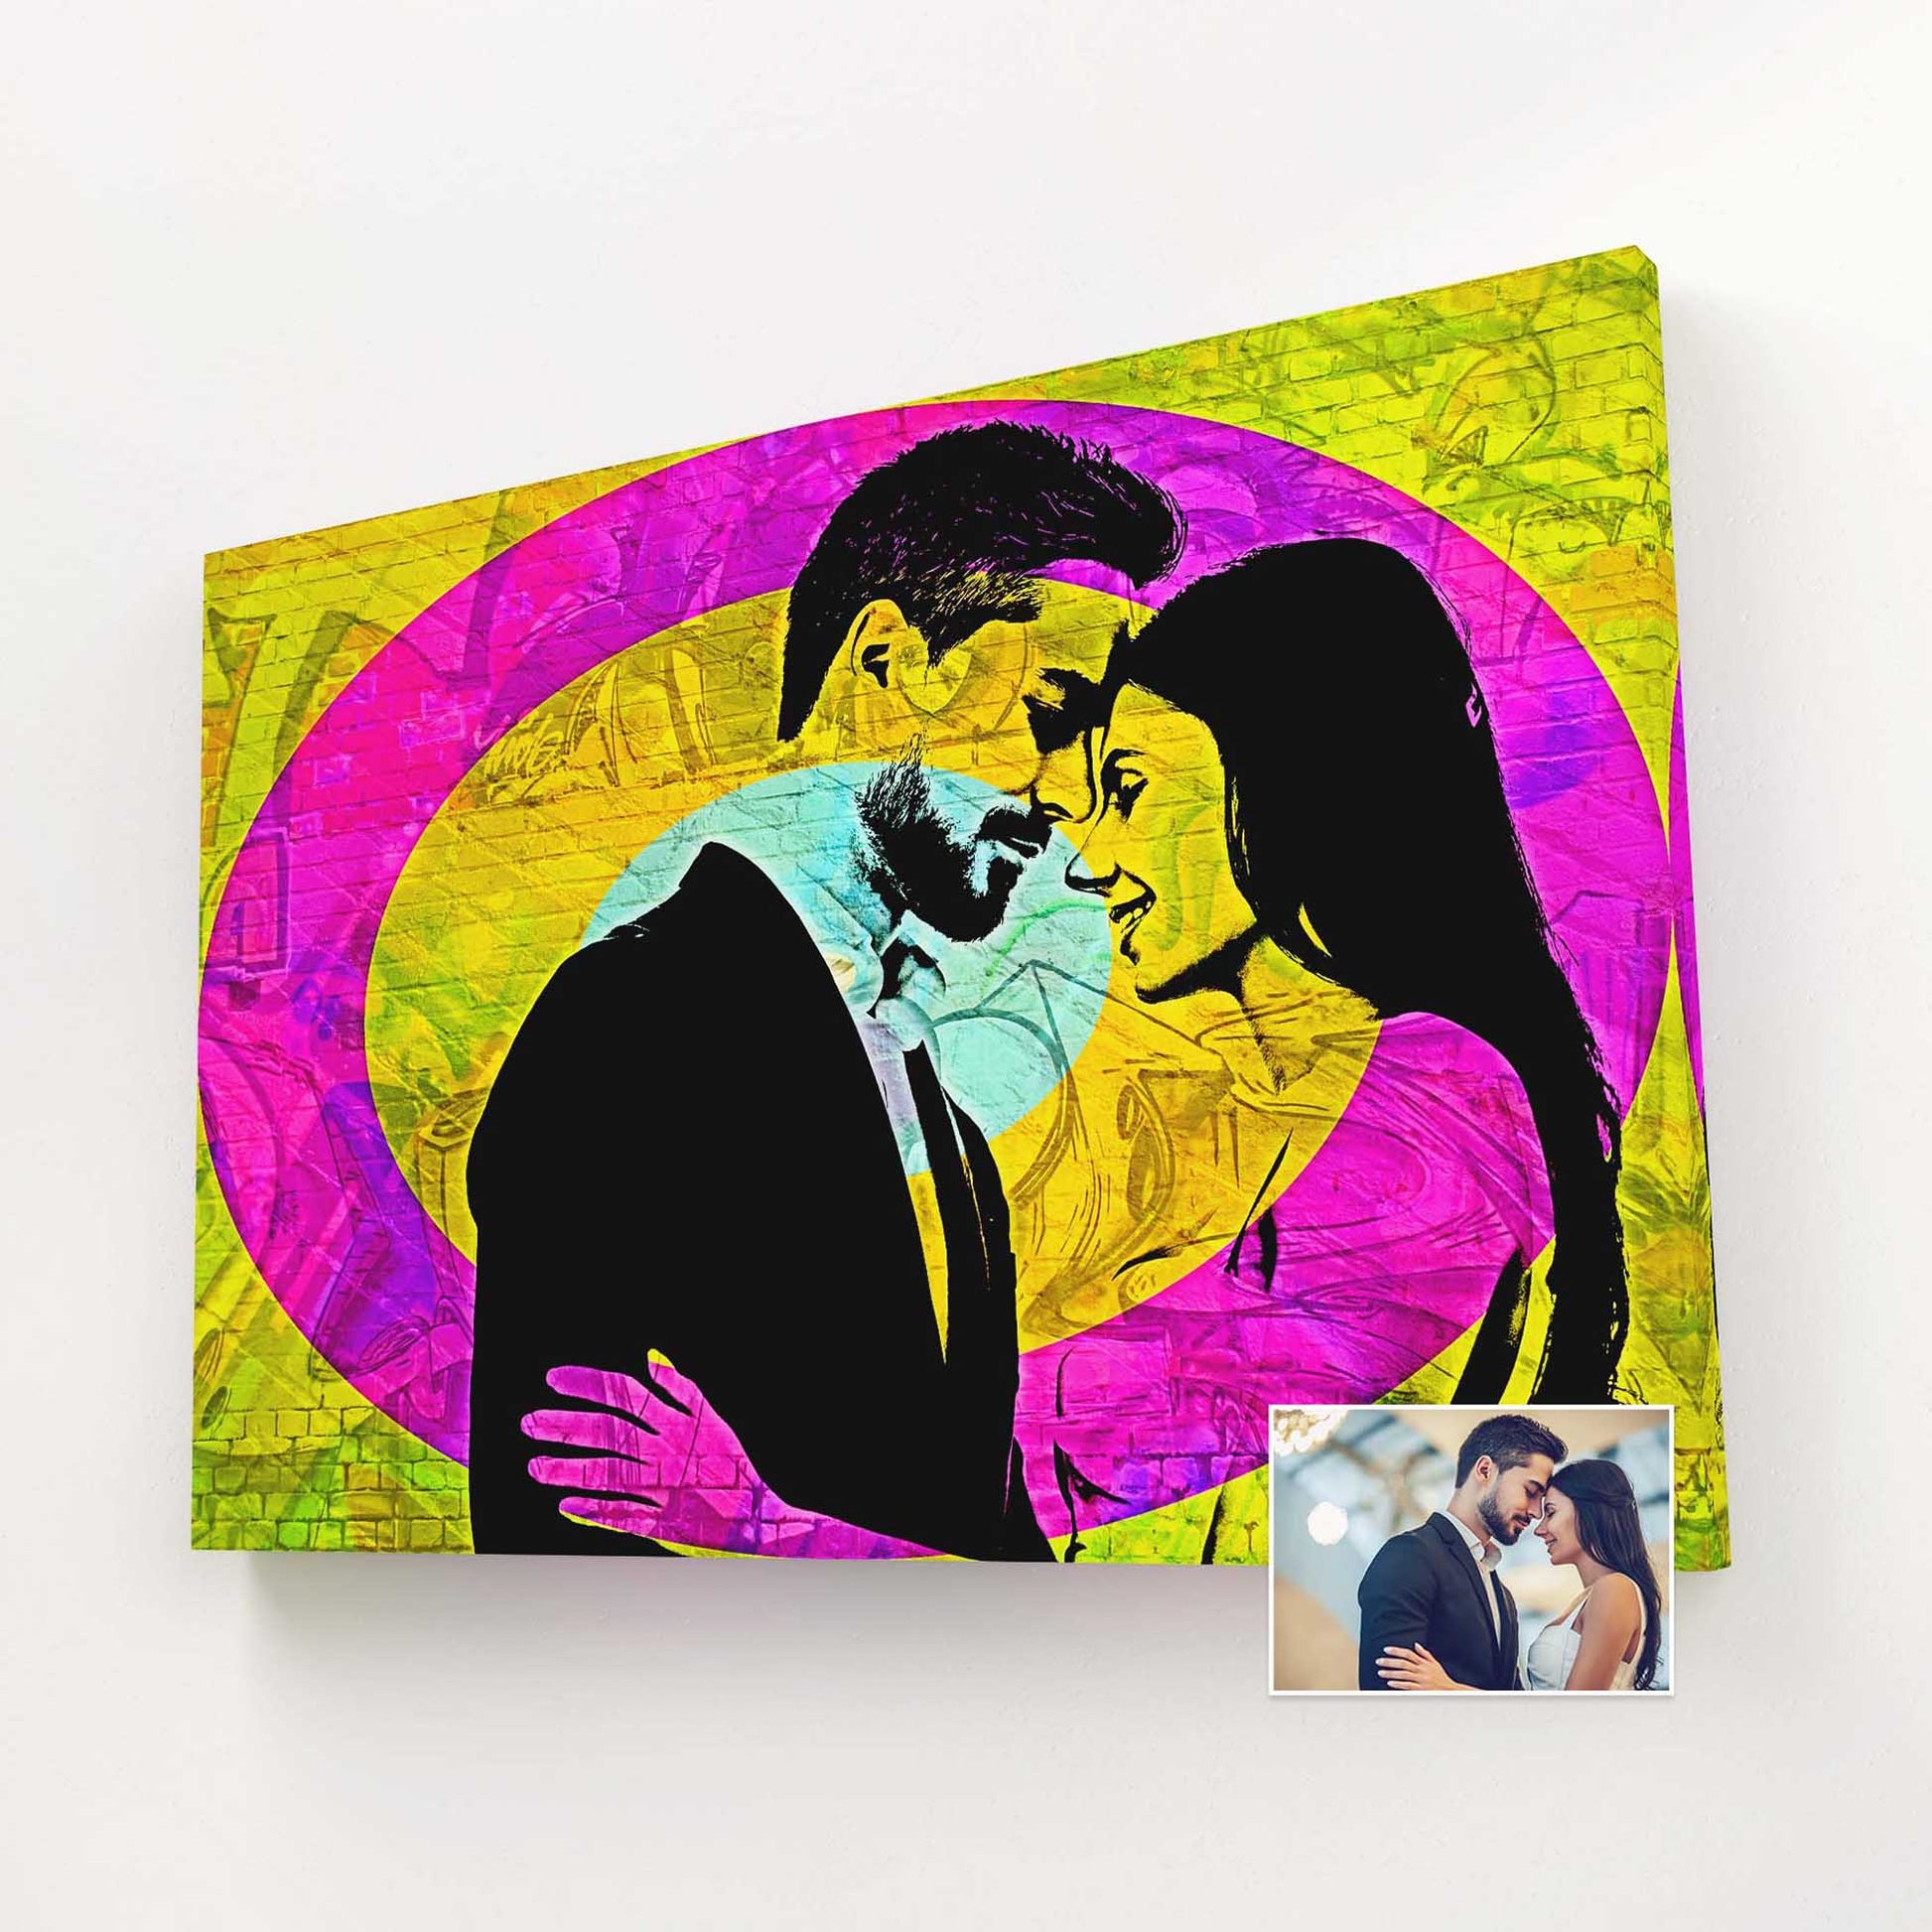 Elevate your space with the dynamic energy of our Personalised Graffiti Street Art Canvas. Its urban, fun, and colorful designs create an exciting atmosphere. Handcrafted on woven canvas, each piece is a stunning visual masterpiece